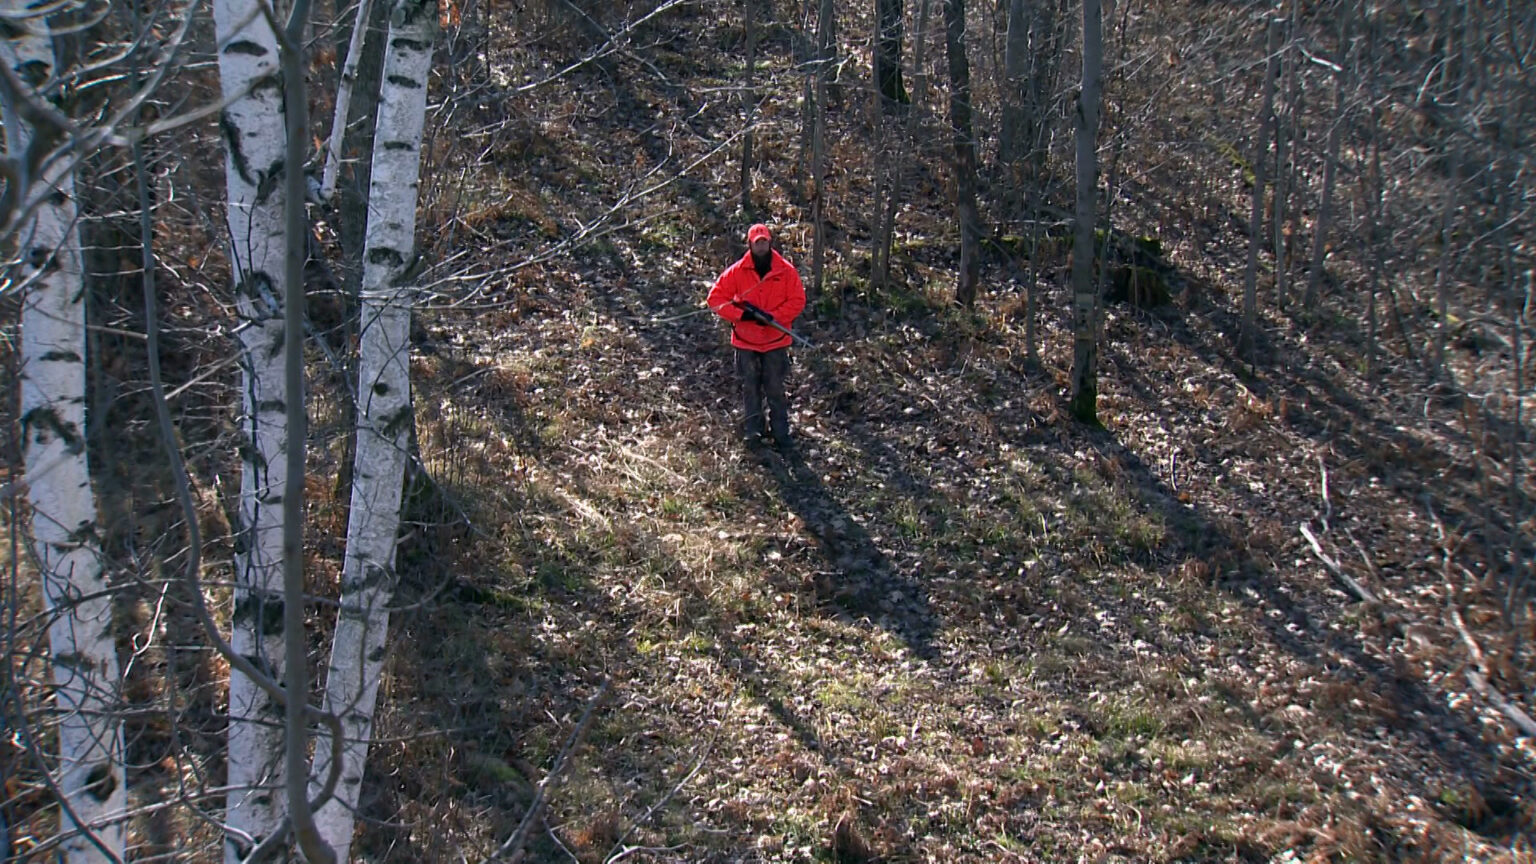 A deer hunter wearing a blaze-orange jacket and cap holds a rifle while standing on leaf-covered ground among different types of trees.